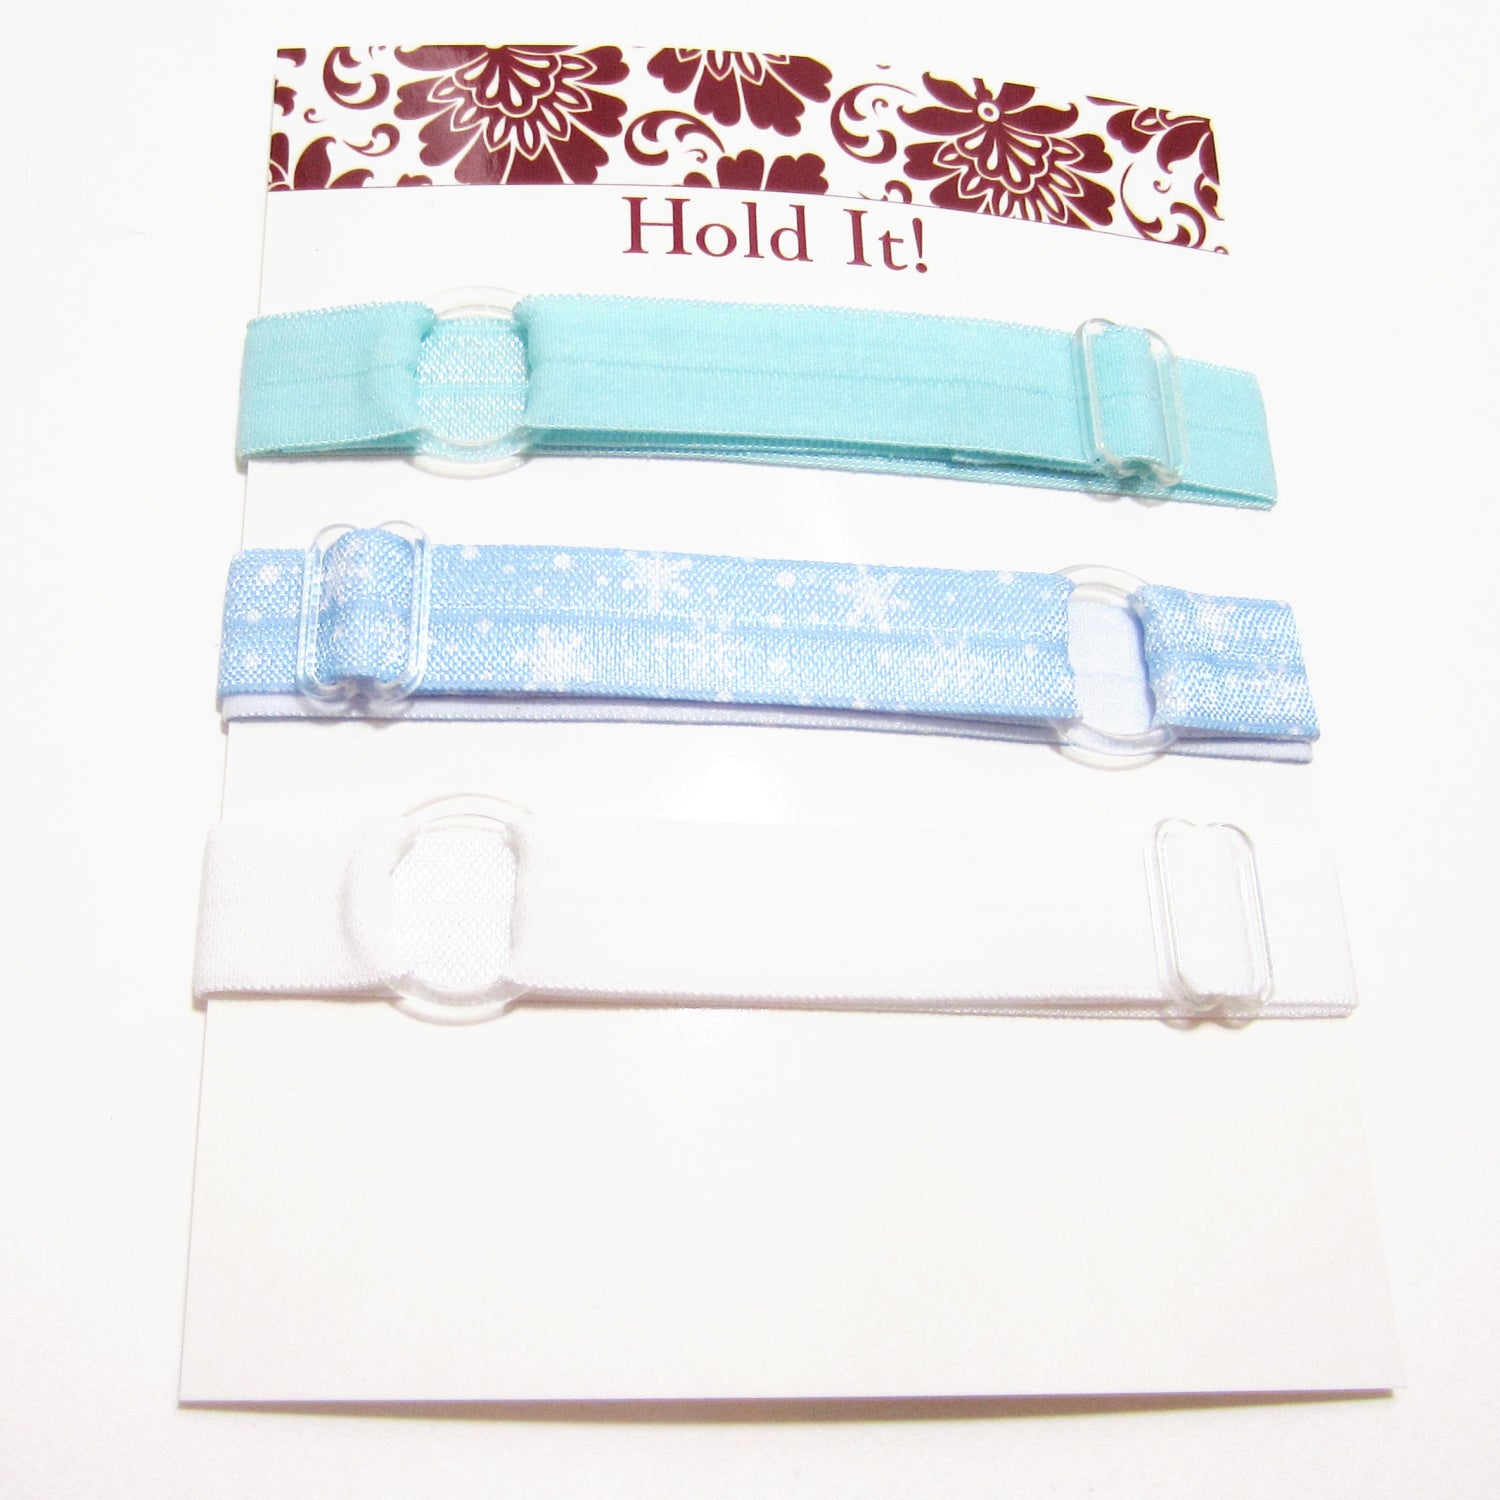 Copy of Set of 3 Adjustable Headbands - Blue & White Snowflake - Hold It!